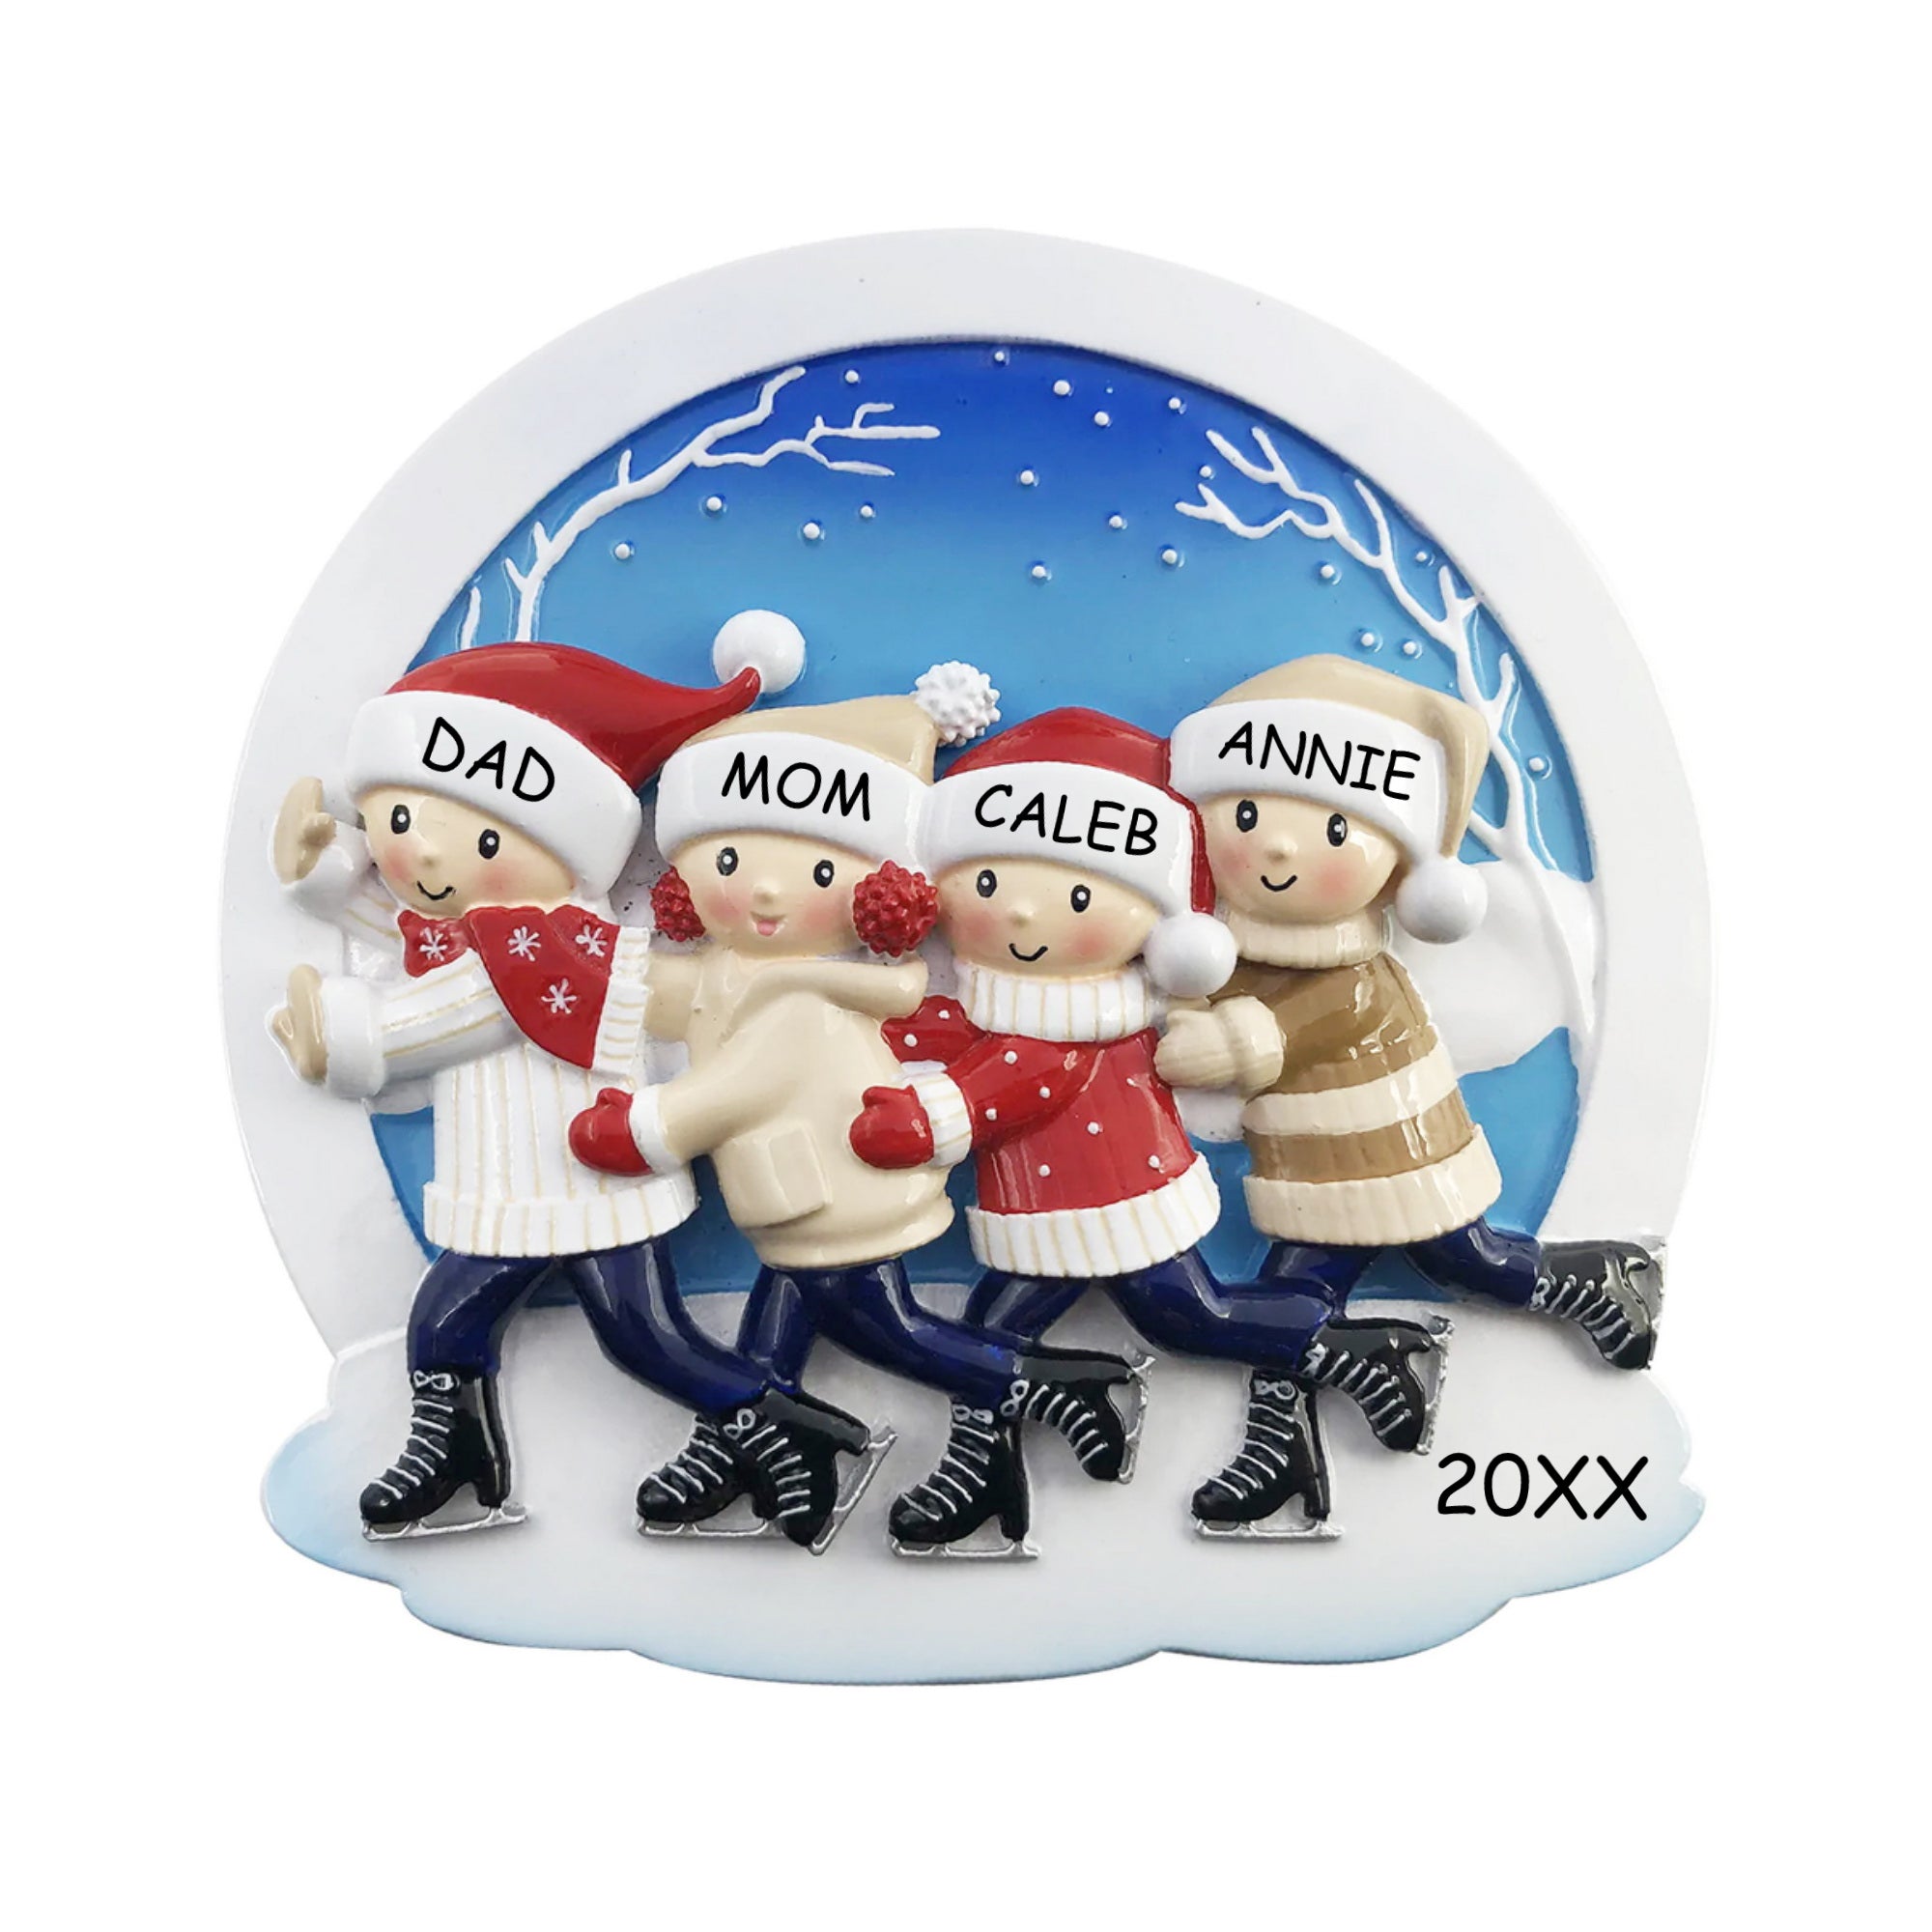 Personalized Ice Skating Christmas Ornament - Family of 4